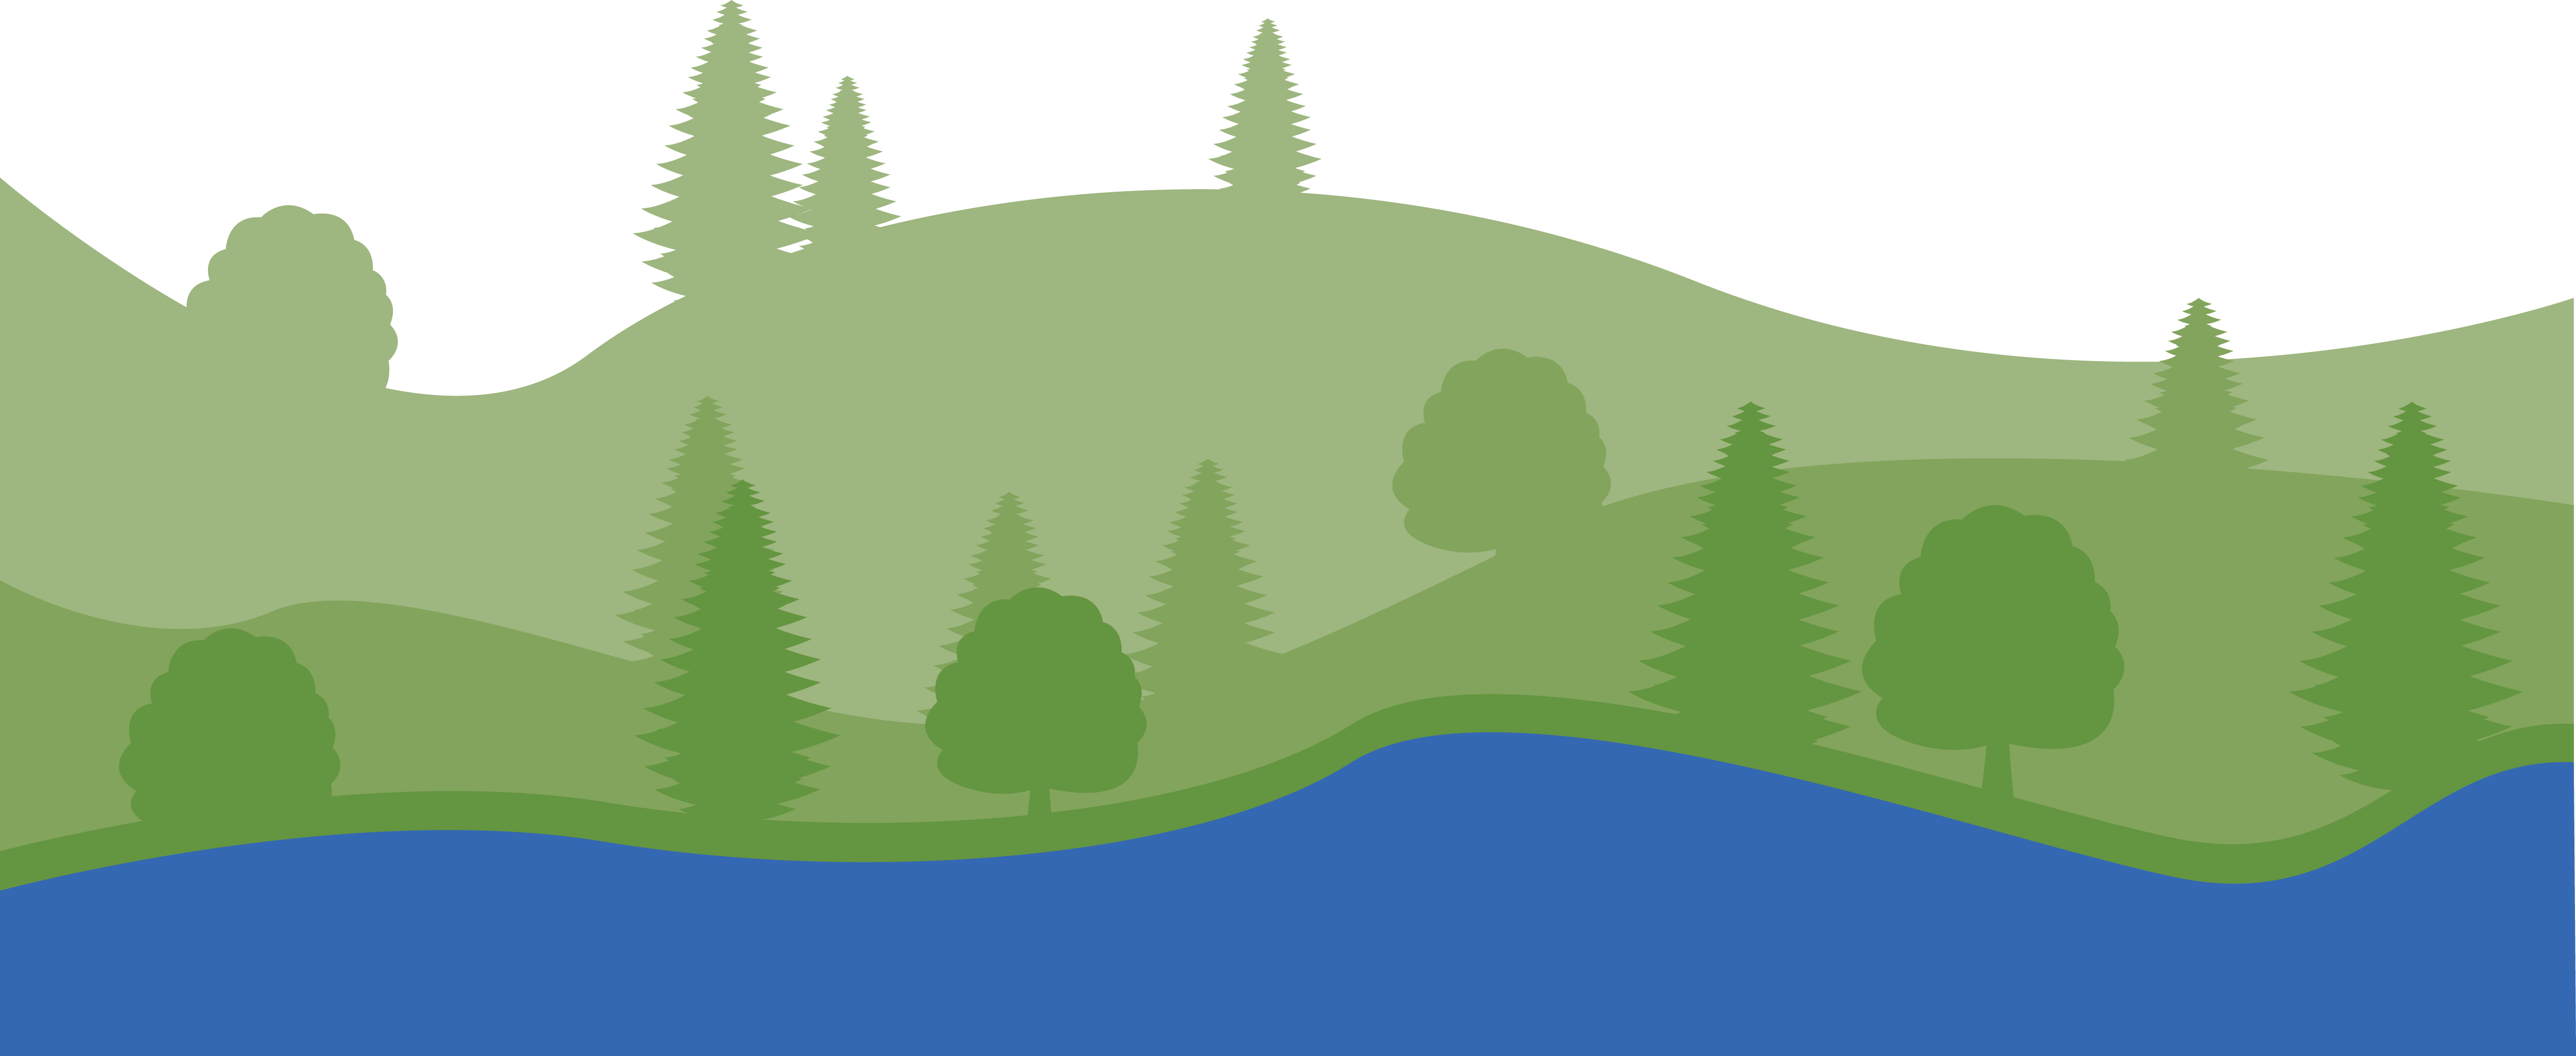 Illustration of mountains and trees